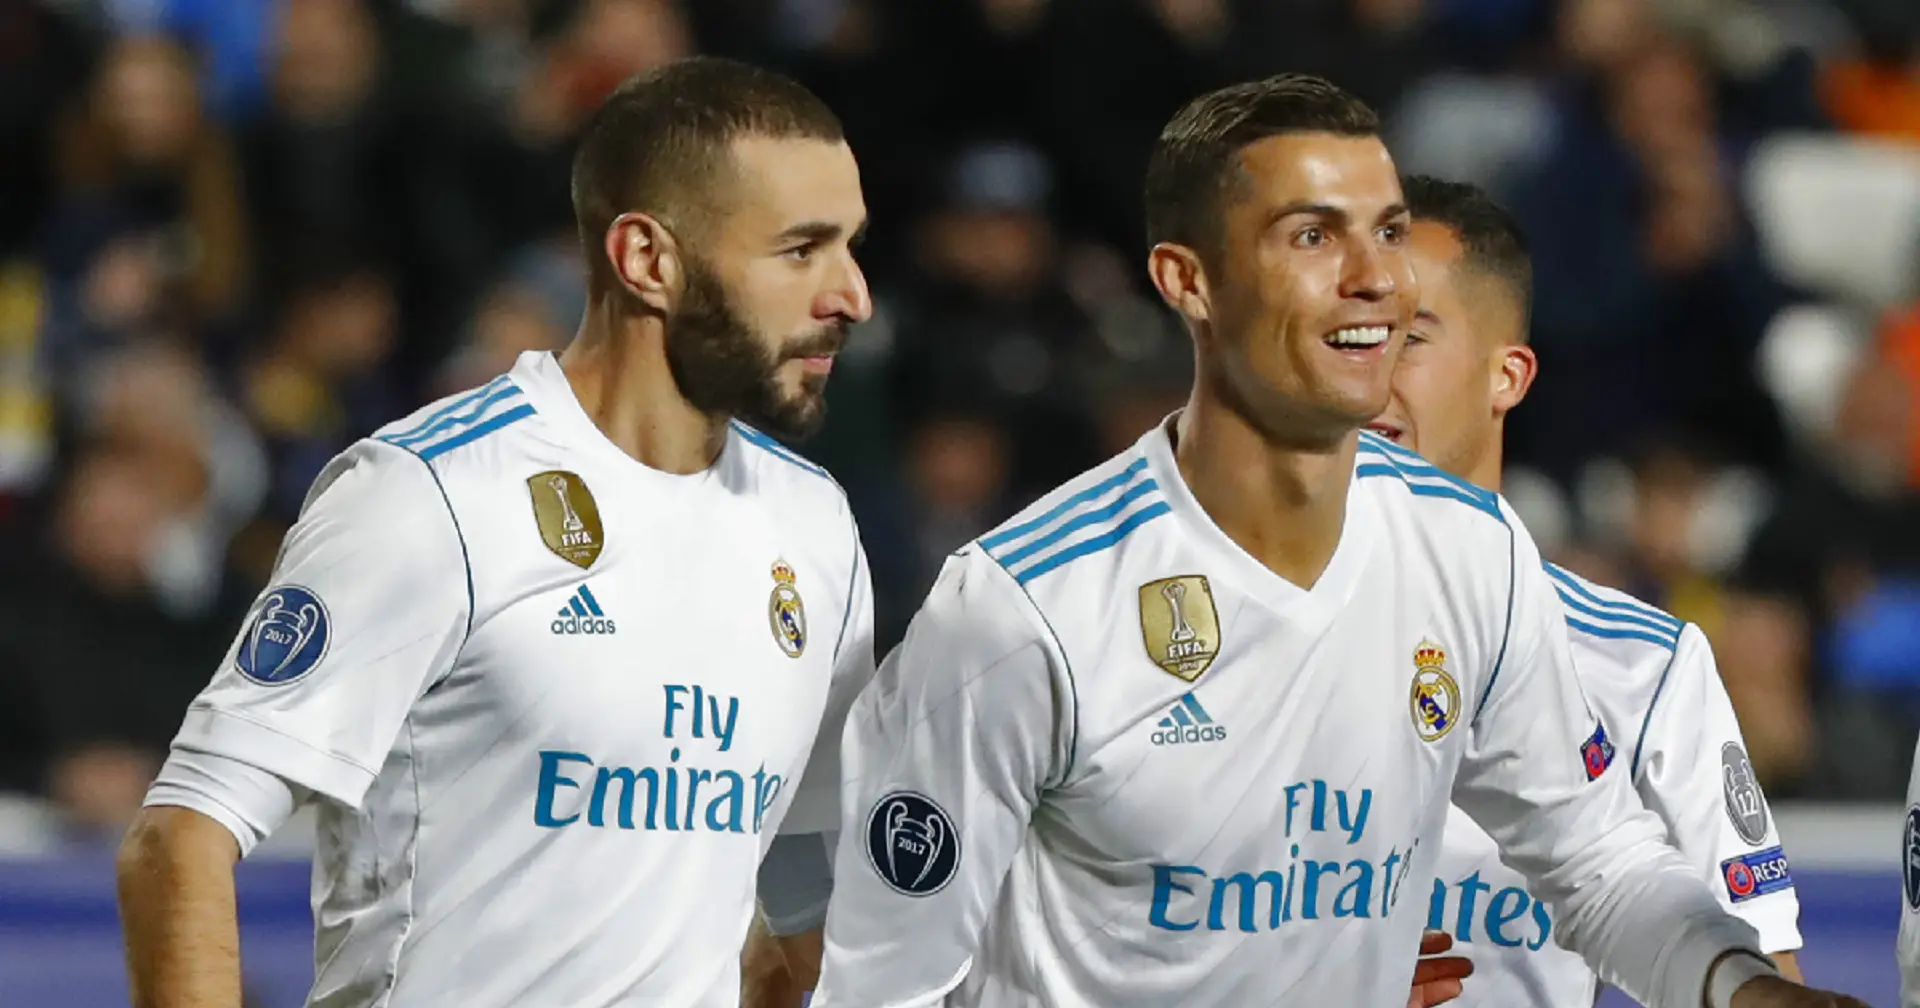 Ronaldo-Benzema rank 2nd among most prolific assist-providing duos in football